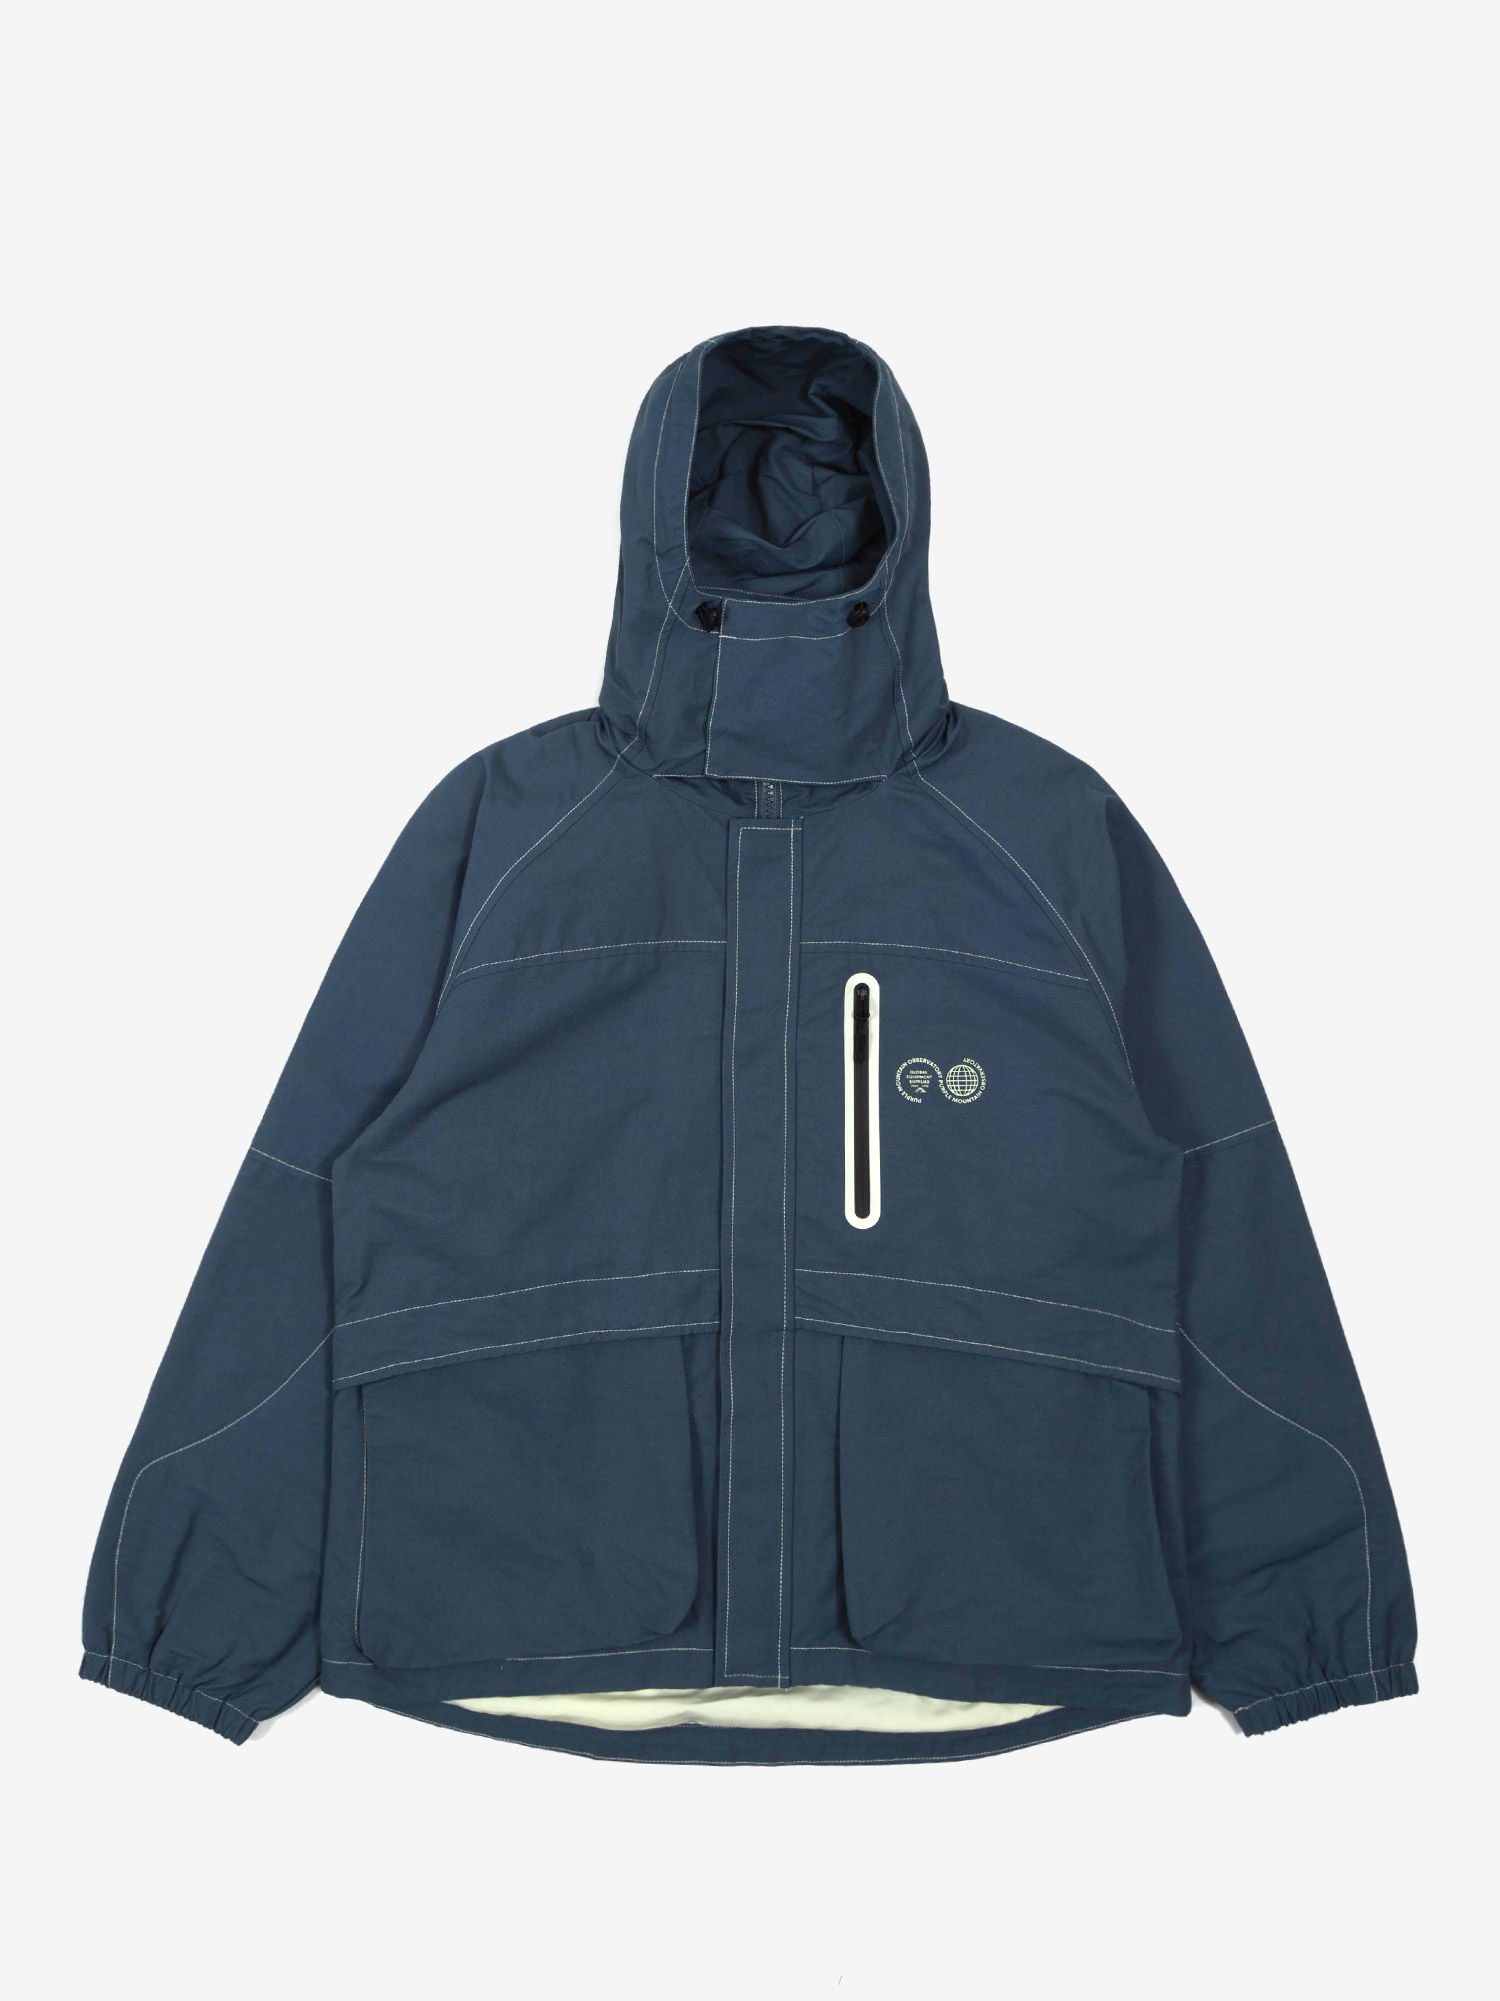 Featured image for “TOKAI HOODED JACKET BLUE”